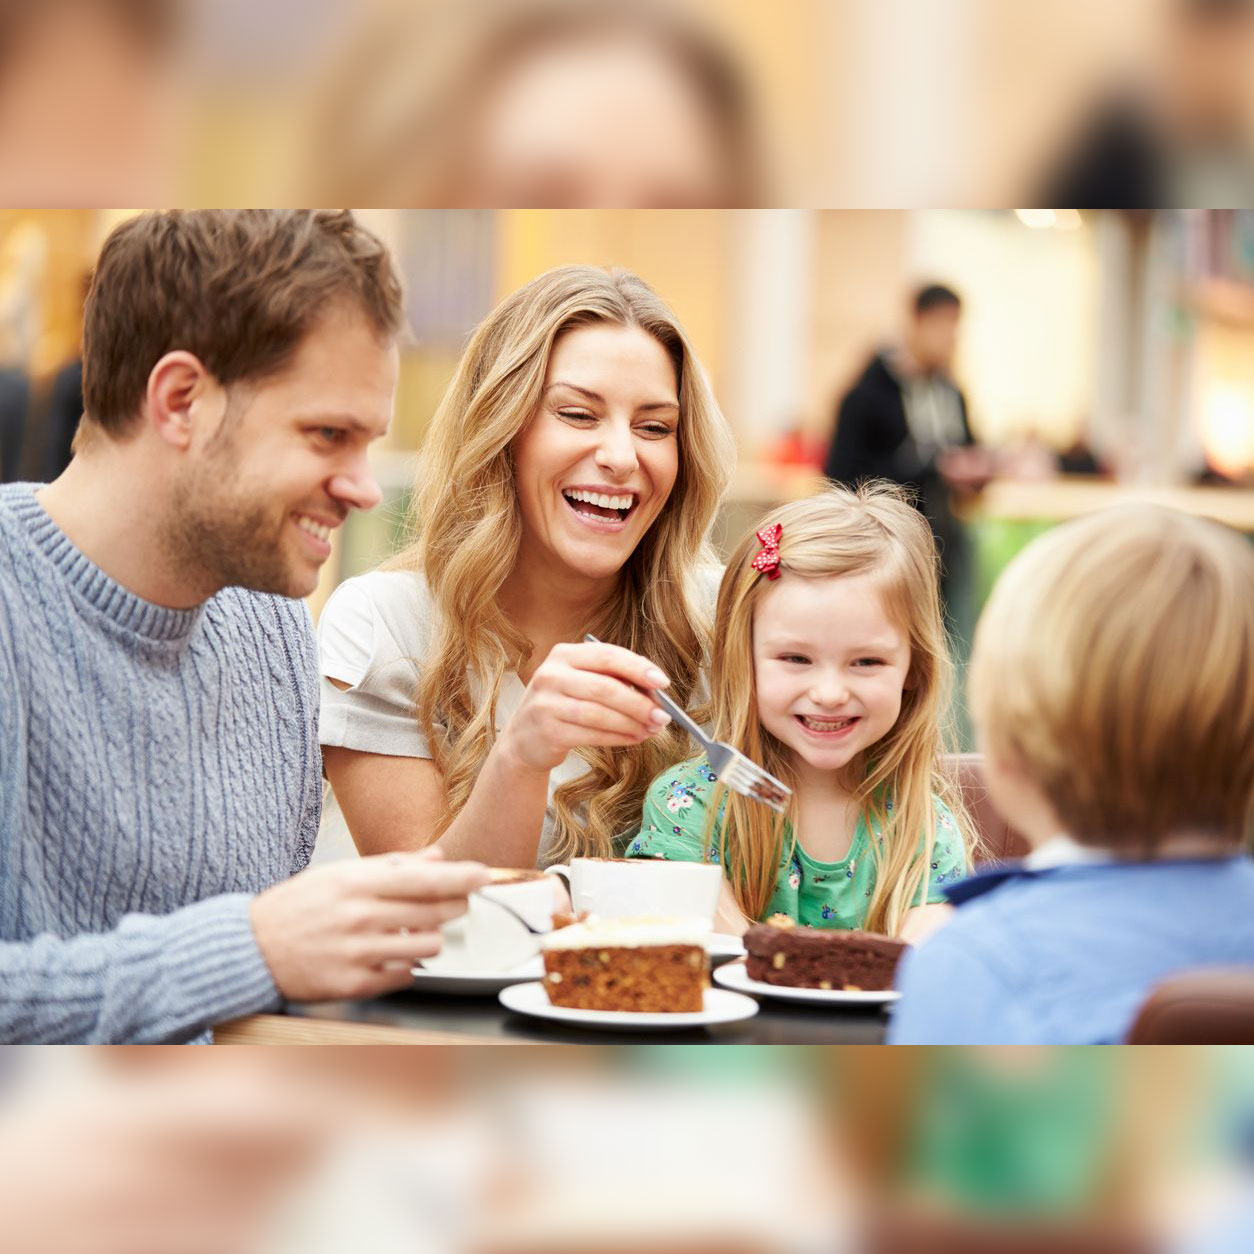 A family eating cake at the restaurant